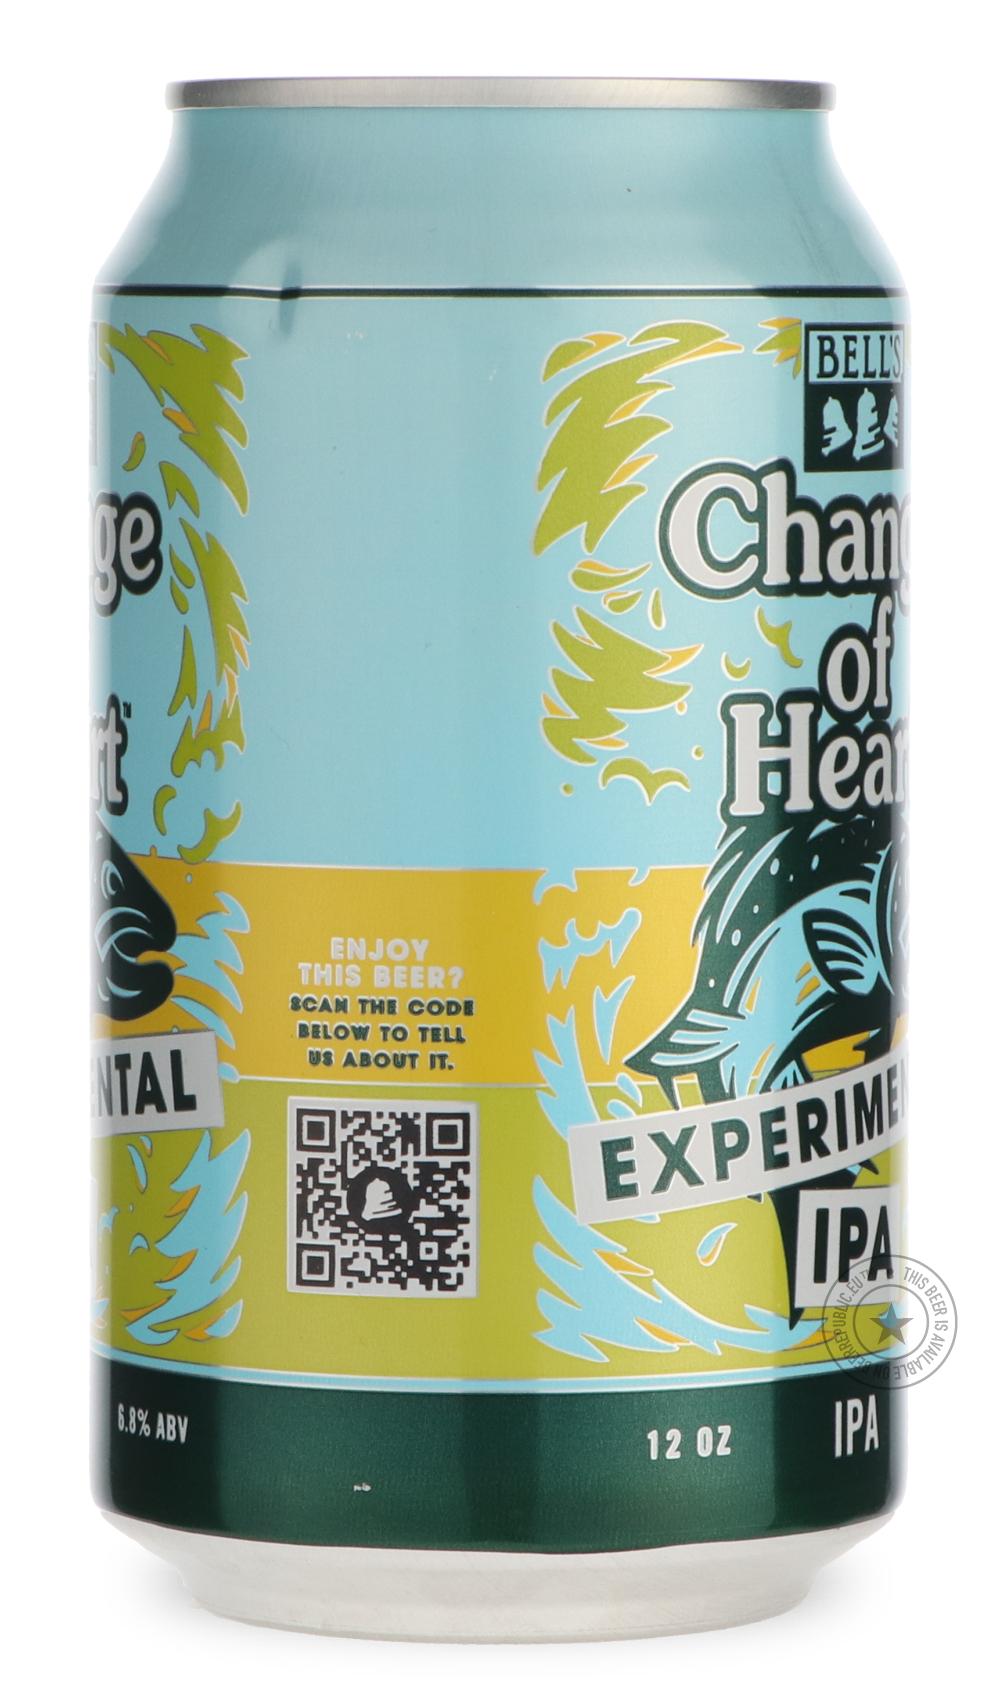 -Bell's- Change of Heart Experimental IPA-IPA- Only @ Beer Republic - The best online beer store for American & Canadian craft beer - Buy beer online from the USA and Canada - Bier online kopen - Amerikaans bier kopen - Craft beer store - Craft beer kopen - Amerikanisch bier kaufen - Bier online kaufen - Acheter biere online - IPA - Stout - Porter - New England IPA - Hazy IPA - Imperial Stout - Barrel Aged - Barrel Aged Imperial Stout - Brown - Dark beer - Blond - Blonde - Pilsner - Lager - Wheat - Weizen -